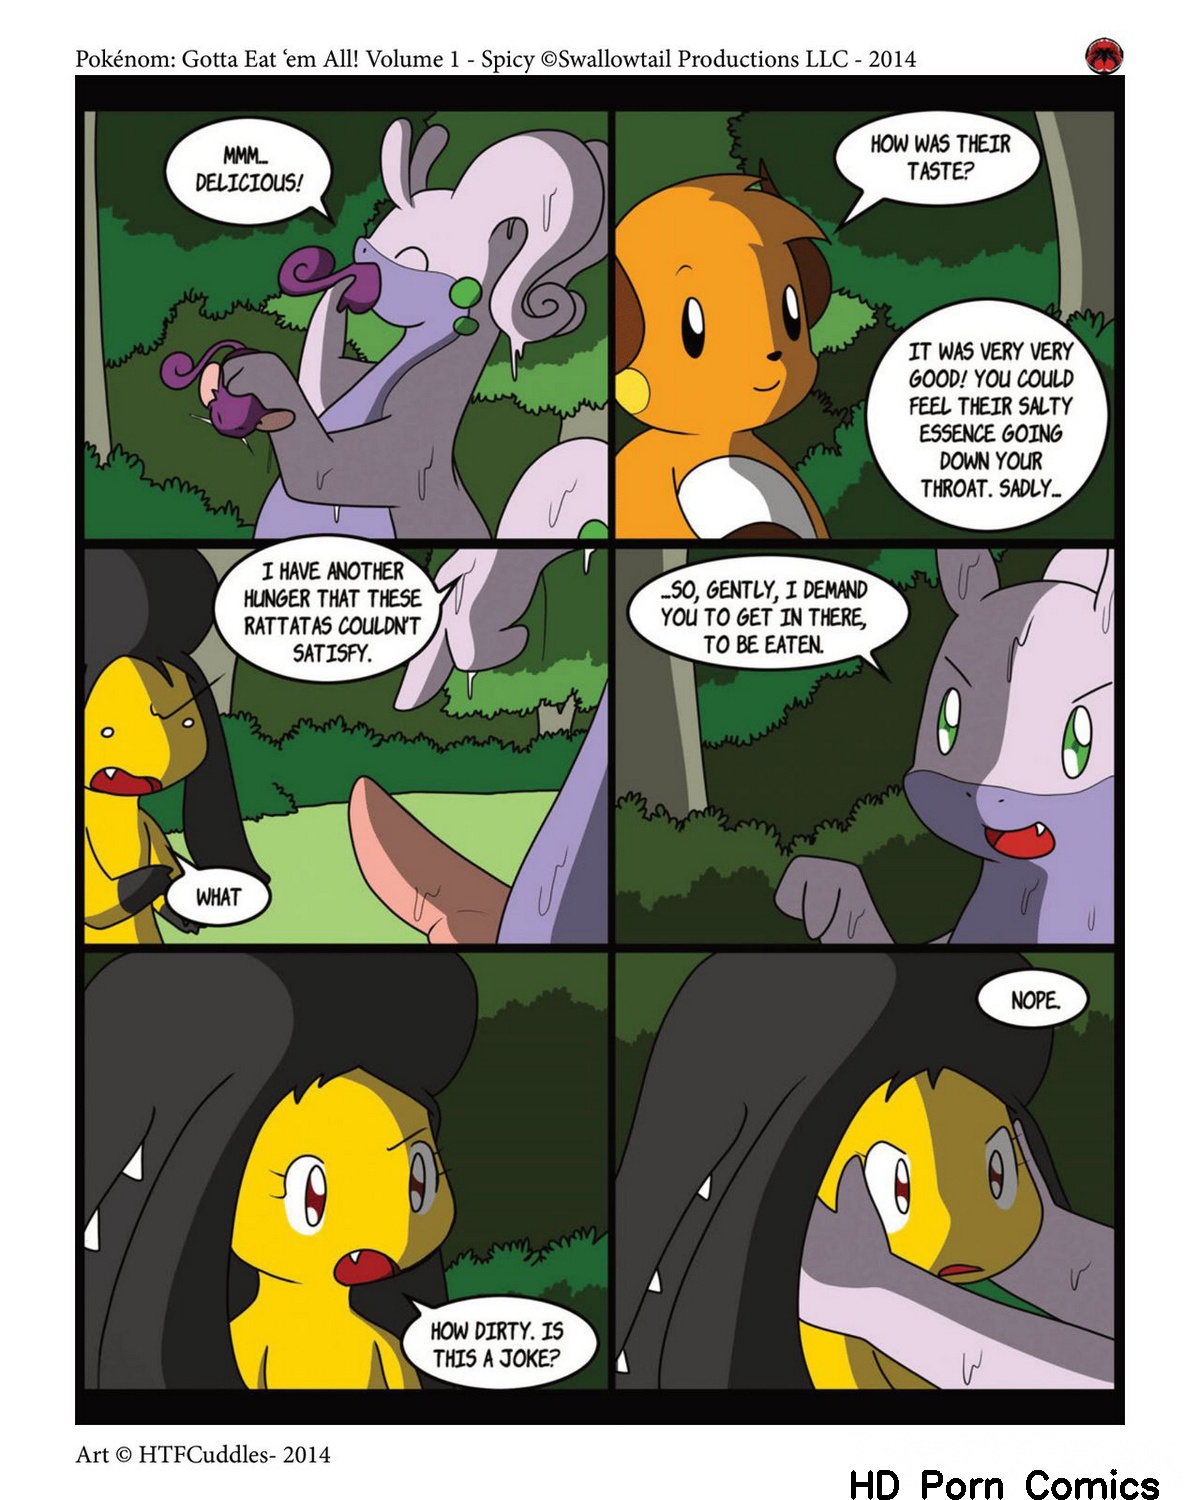 another-kind-of-hunger-005 - Pokemon Porn Comics